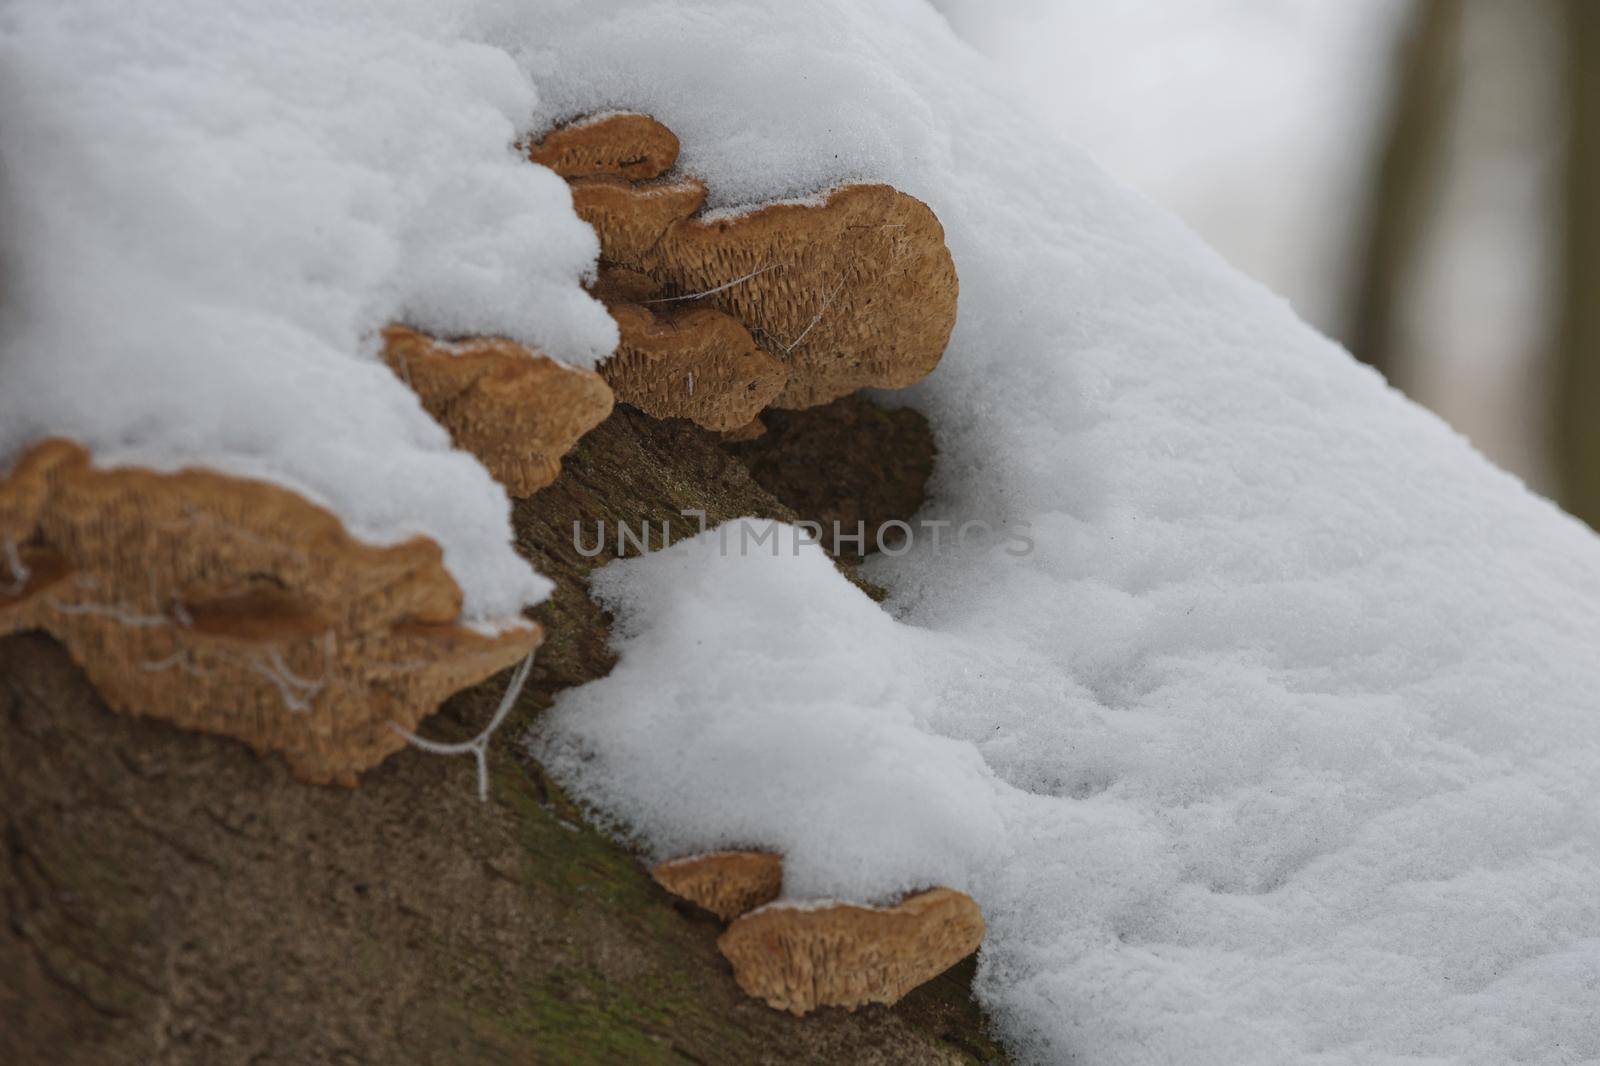 Close-up of a rotten stump with tree mushrooms covered by snow on a horizontal trunk during a winter in Czech republic.